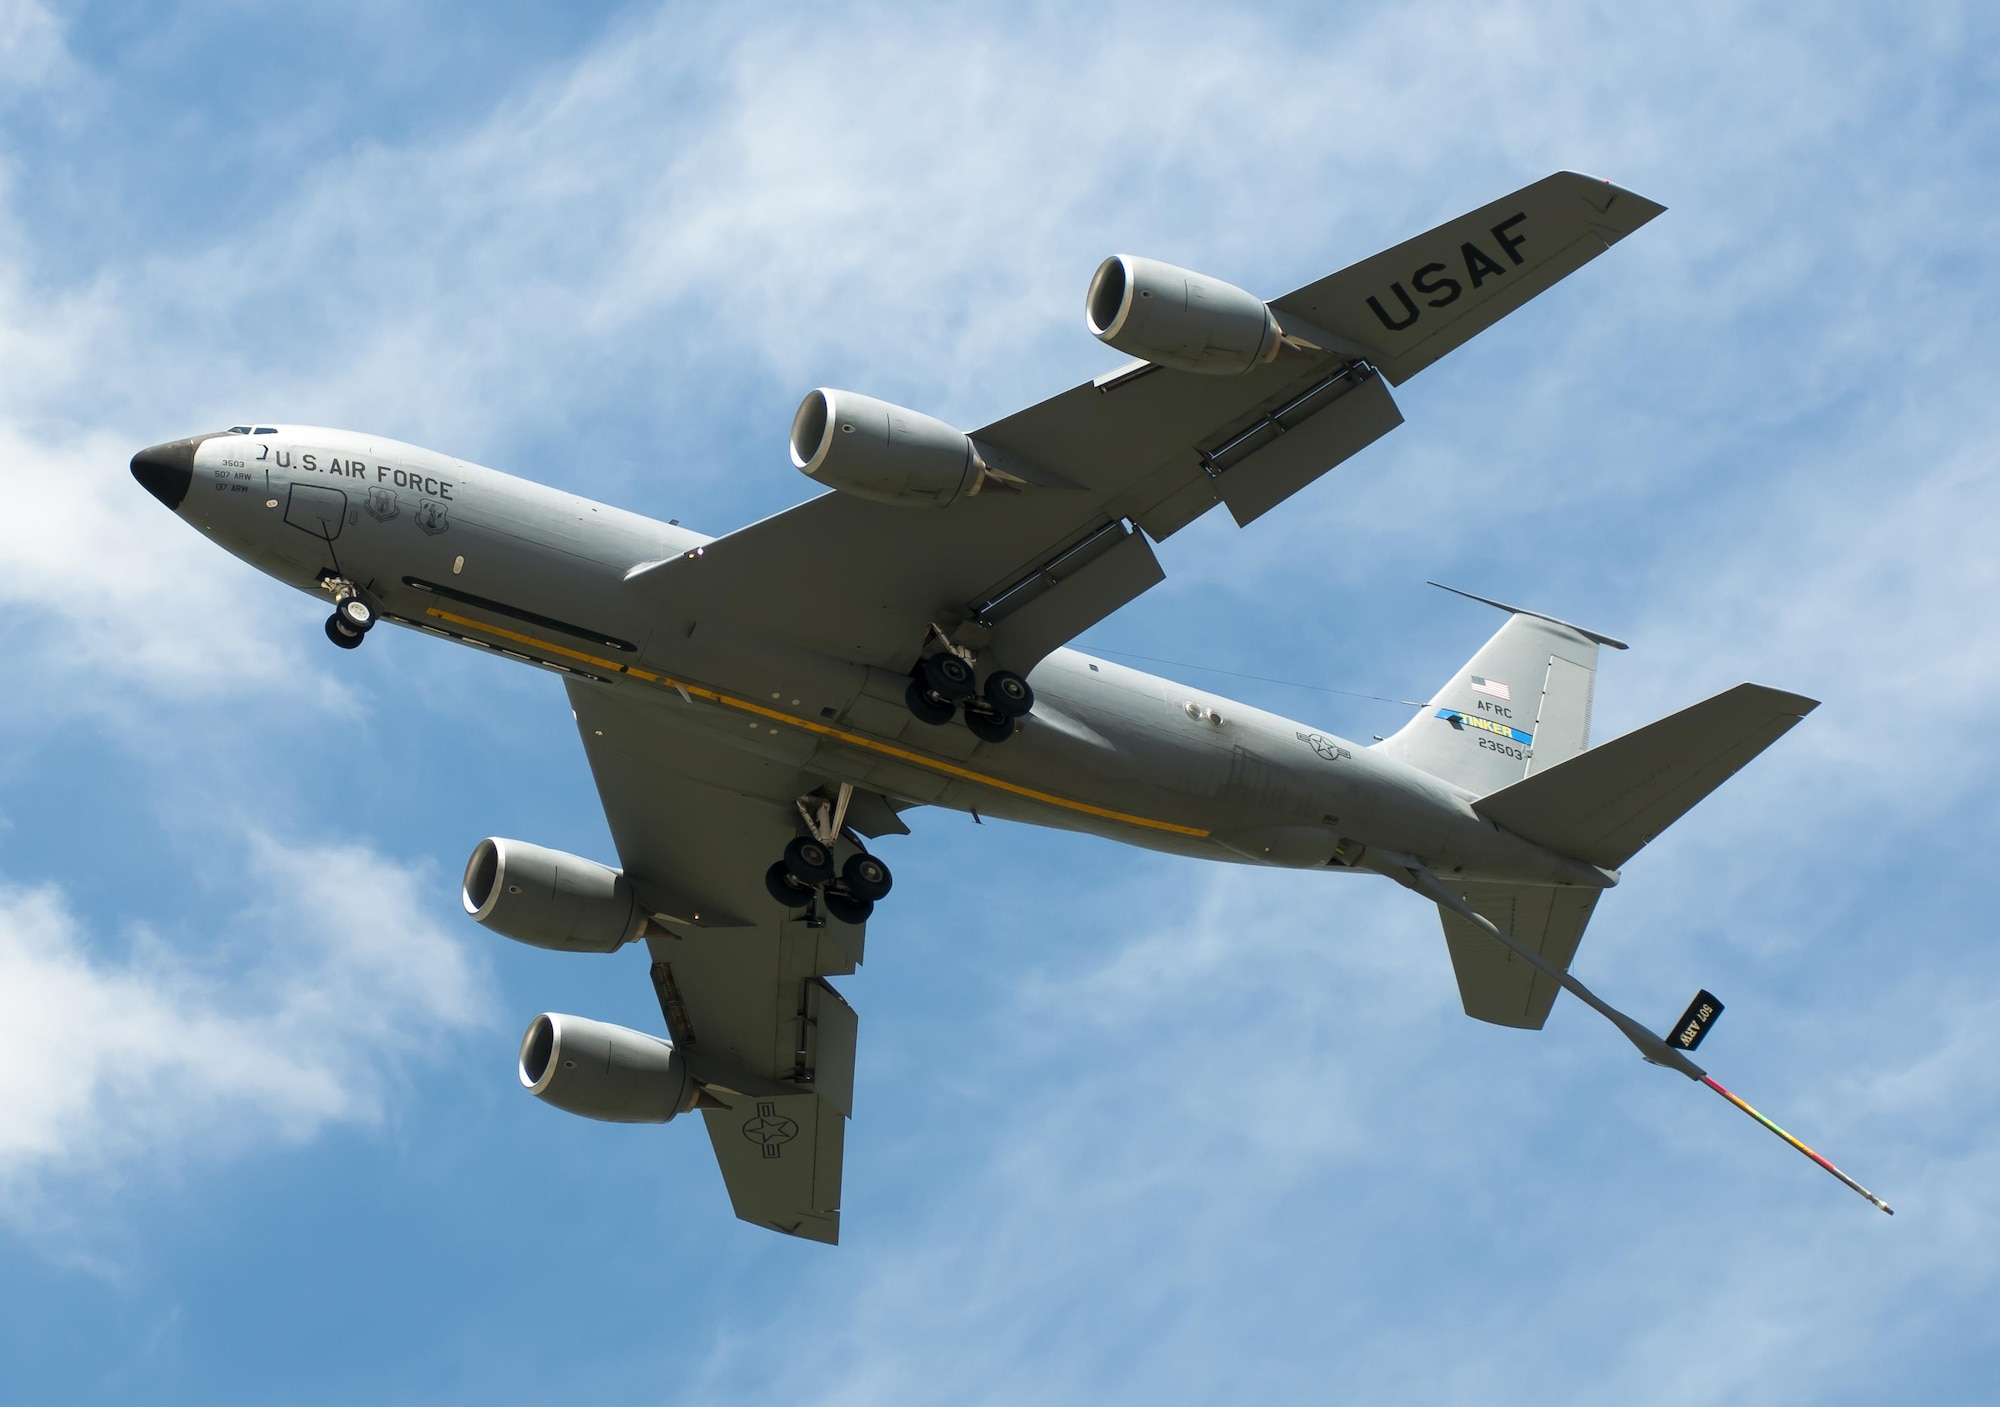 A KC-135R Stratotanker operated and maintained by the 507th Air Refueling Wing flies by an air show crowd in 2014 at Tinker Air Force Base, Oklahoma.  In 1994, the 507th ARW began operating and maintaining the KC-135 on operational mission's here. (U.S. Air Force Photo/Senior Airman Mark Hybers)